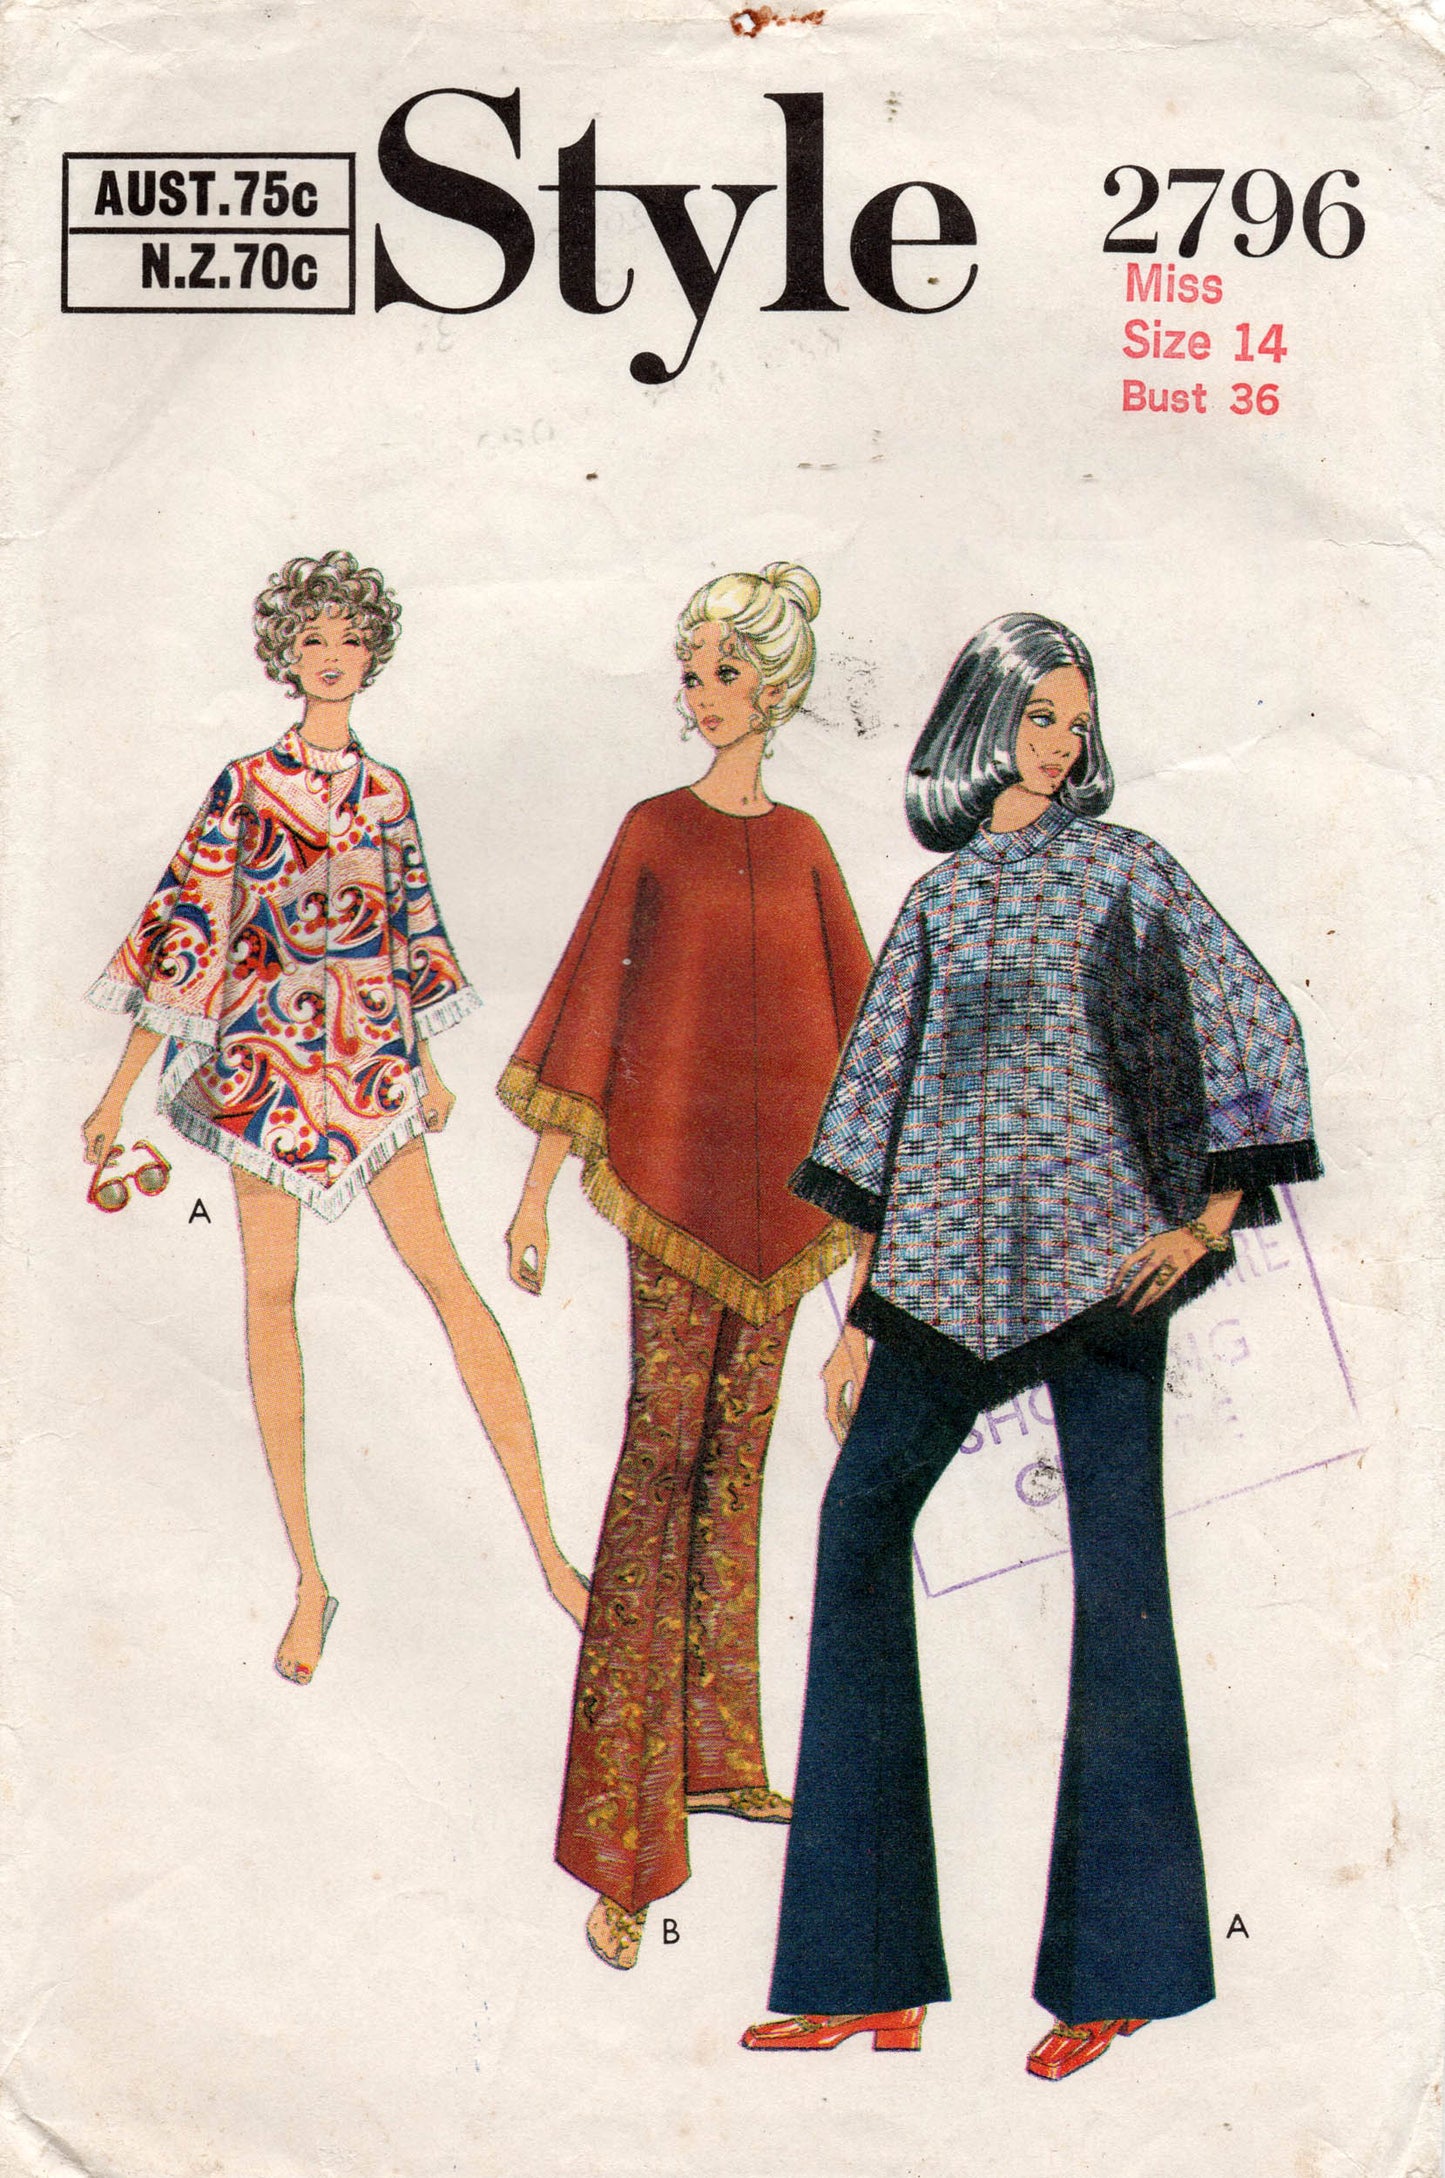 Style 2796 Womens Poncho / Beach Cover Up & Pants 1970s Vintage Sewing Pattern Size 12 or 14